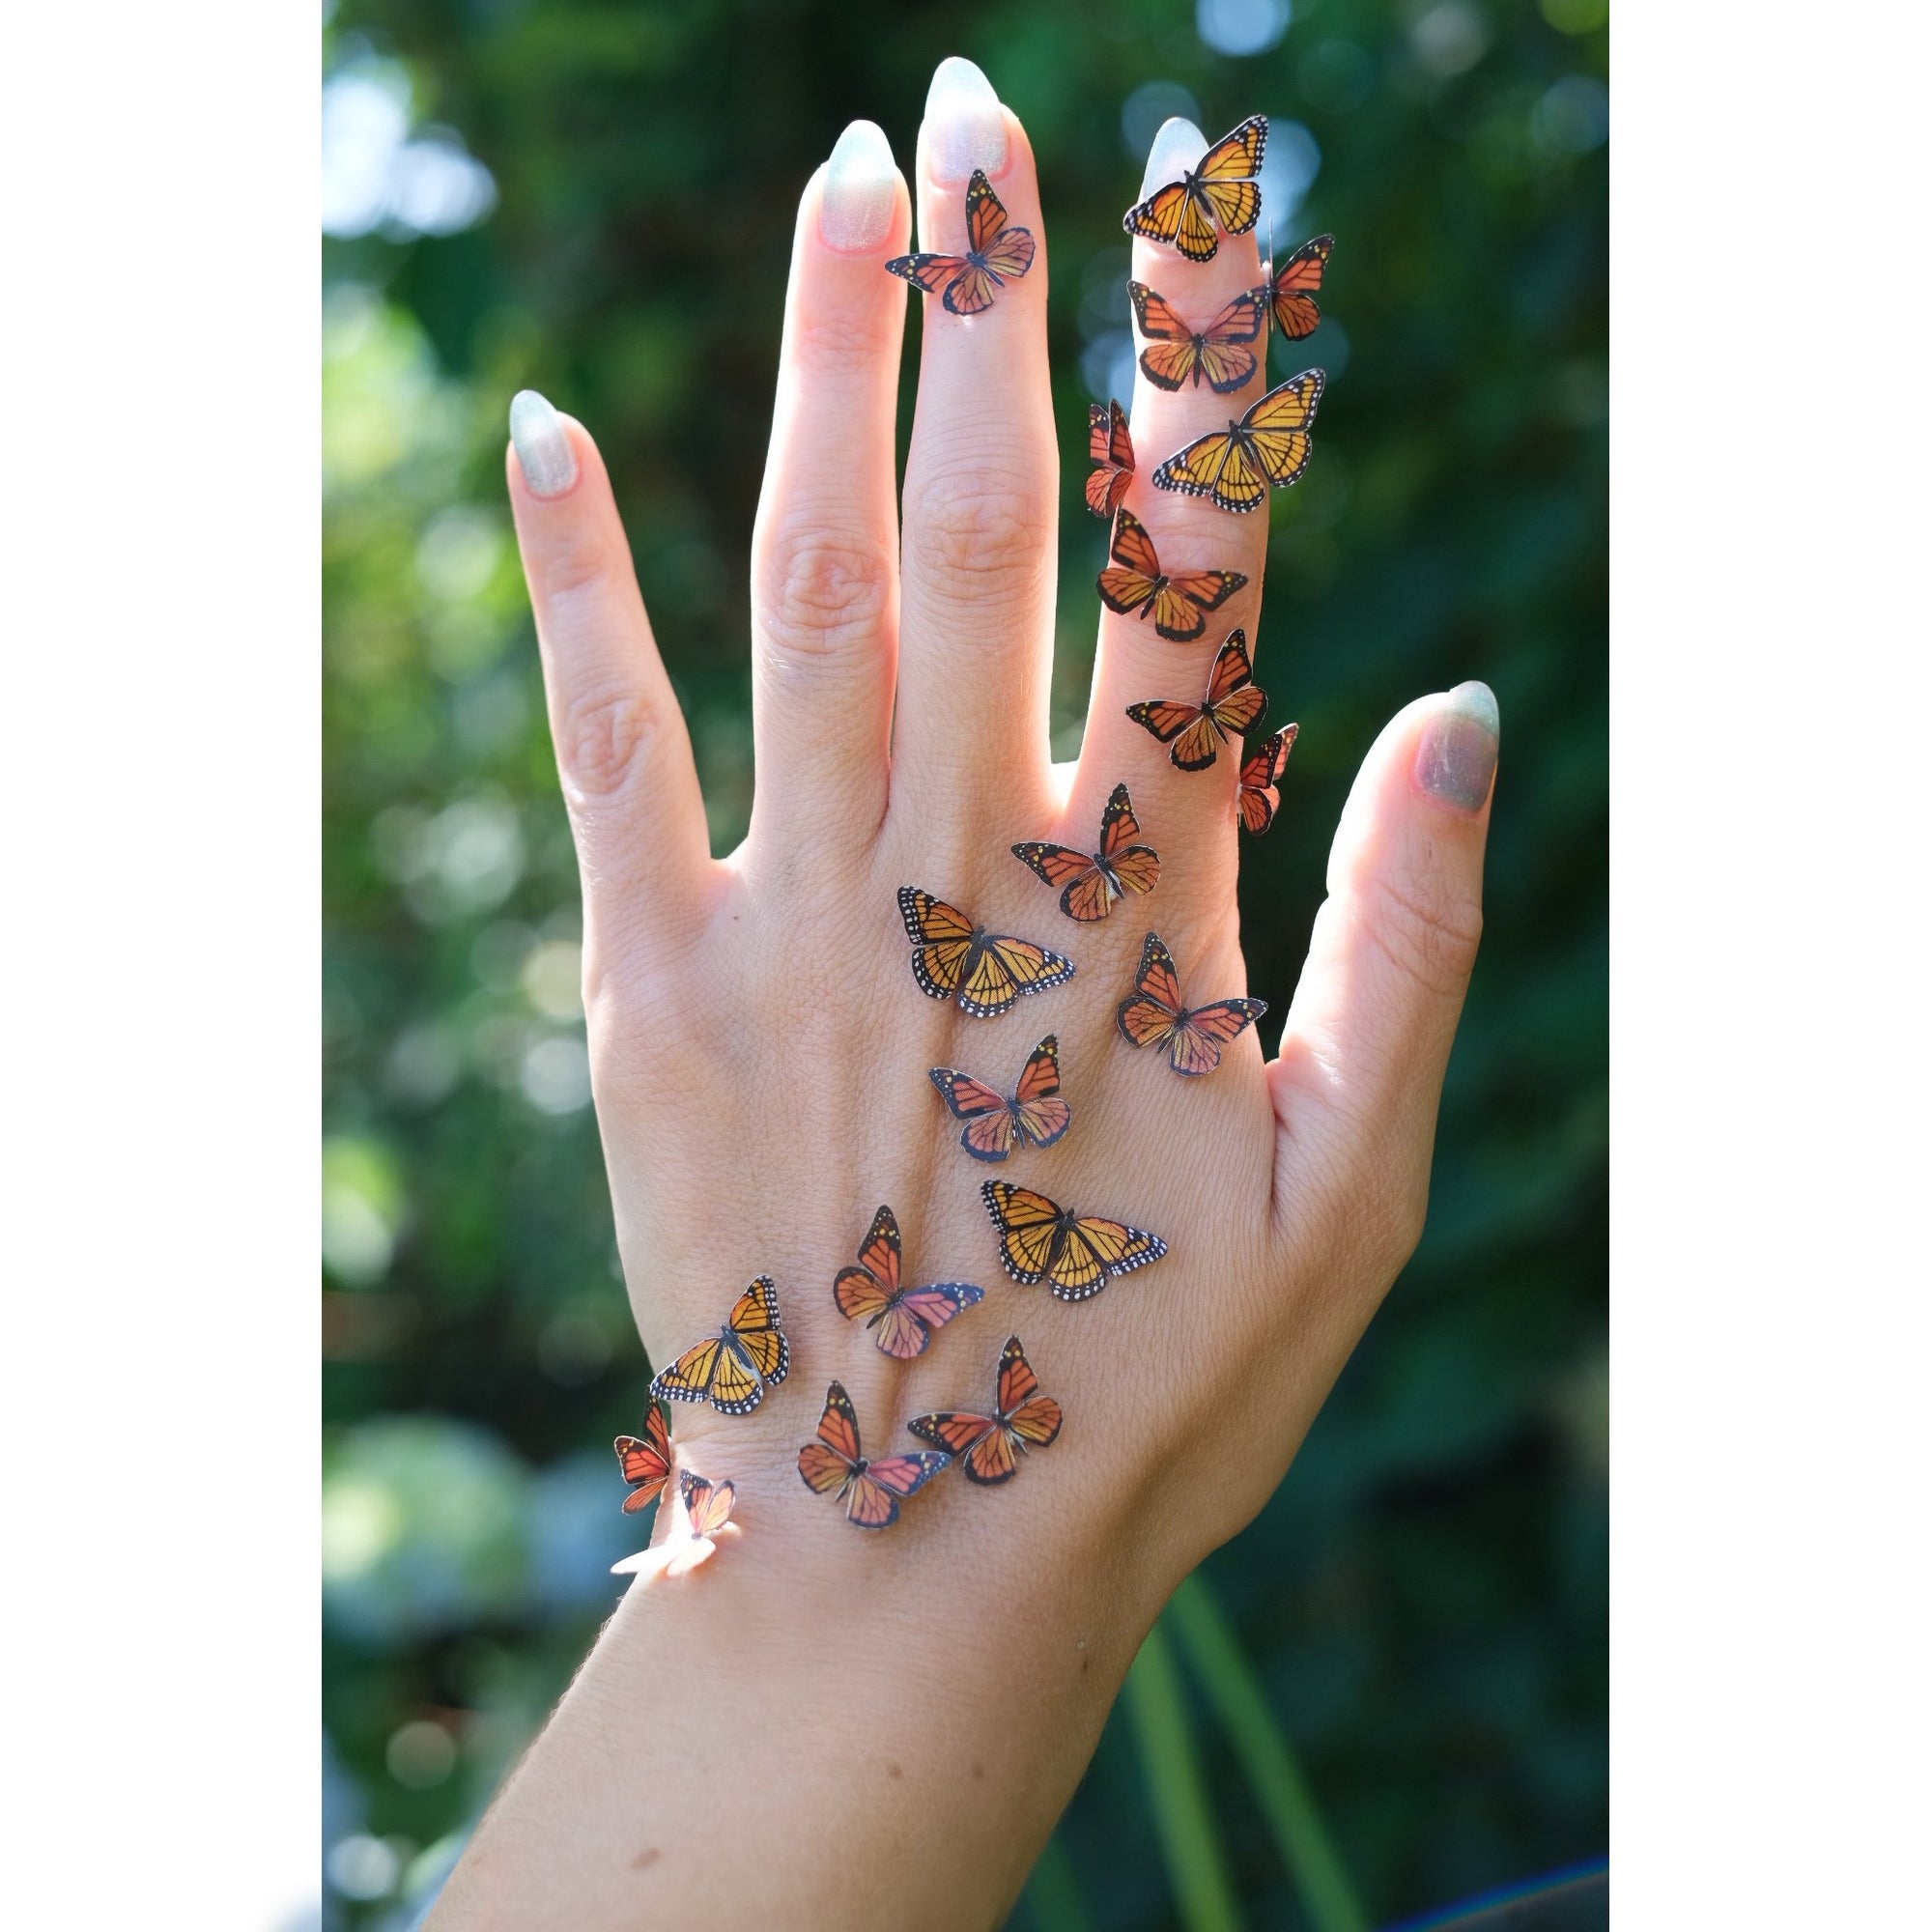 'Marmalade' Micro Monarch Butterfly Collection - Artist Discount